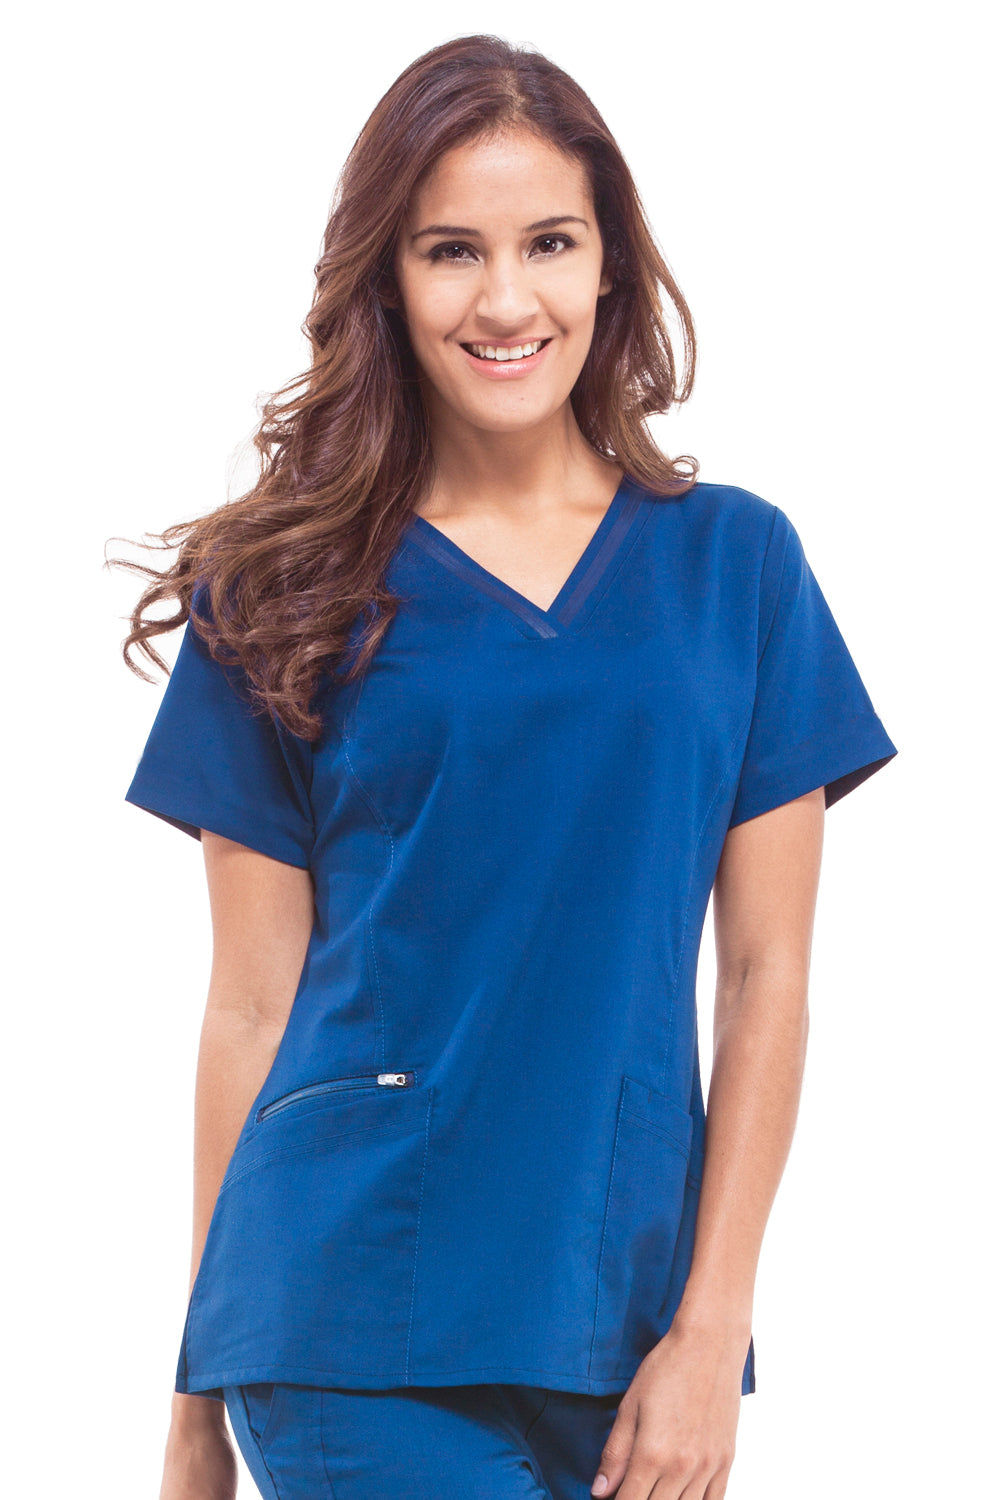 Healing Hands Scrub Top Purple Label Jasmin in Royal at Parker's Clothing and Shoes.